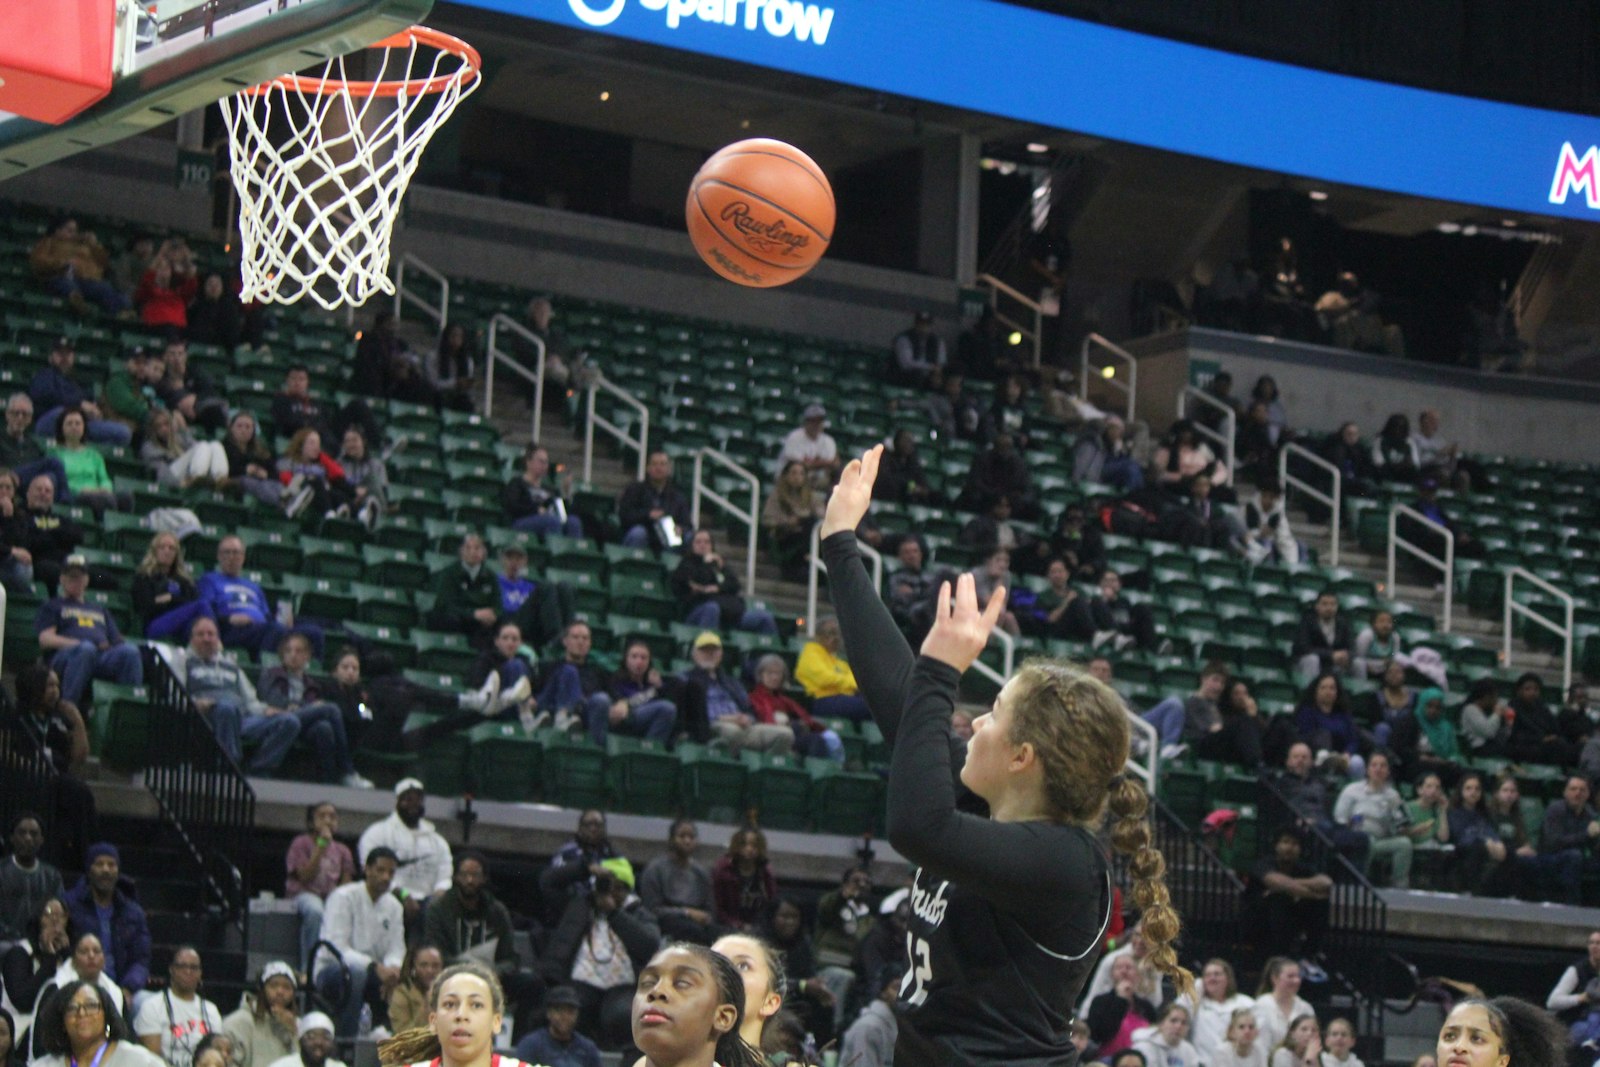 Fr. Gabriel Richard’s Bethie Benz gets a clean shot for a basket in the second quarter of the MHSAA Division 2 championship game. Benz is one of just two seniors on the Fighting Irish roster as the majority of the team will return next season.